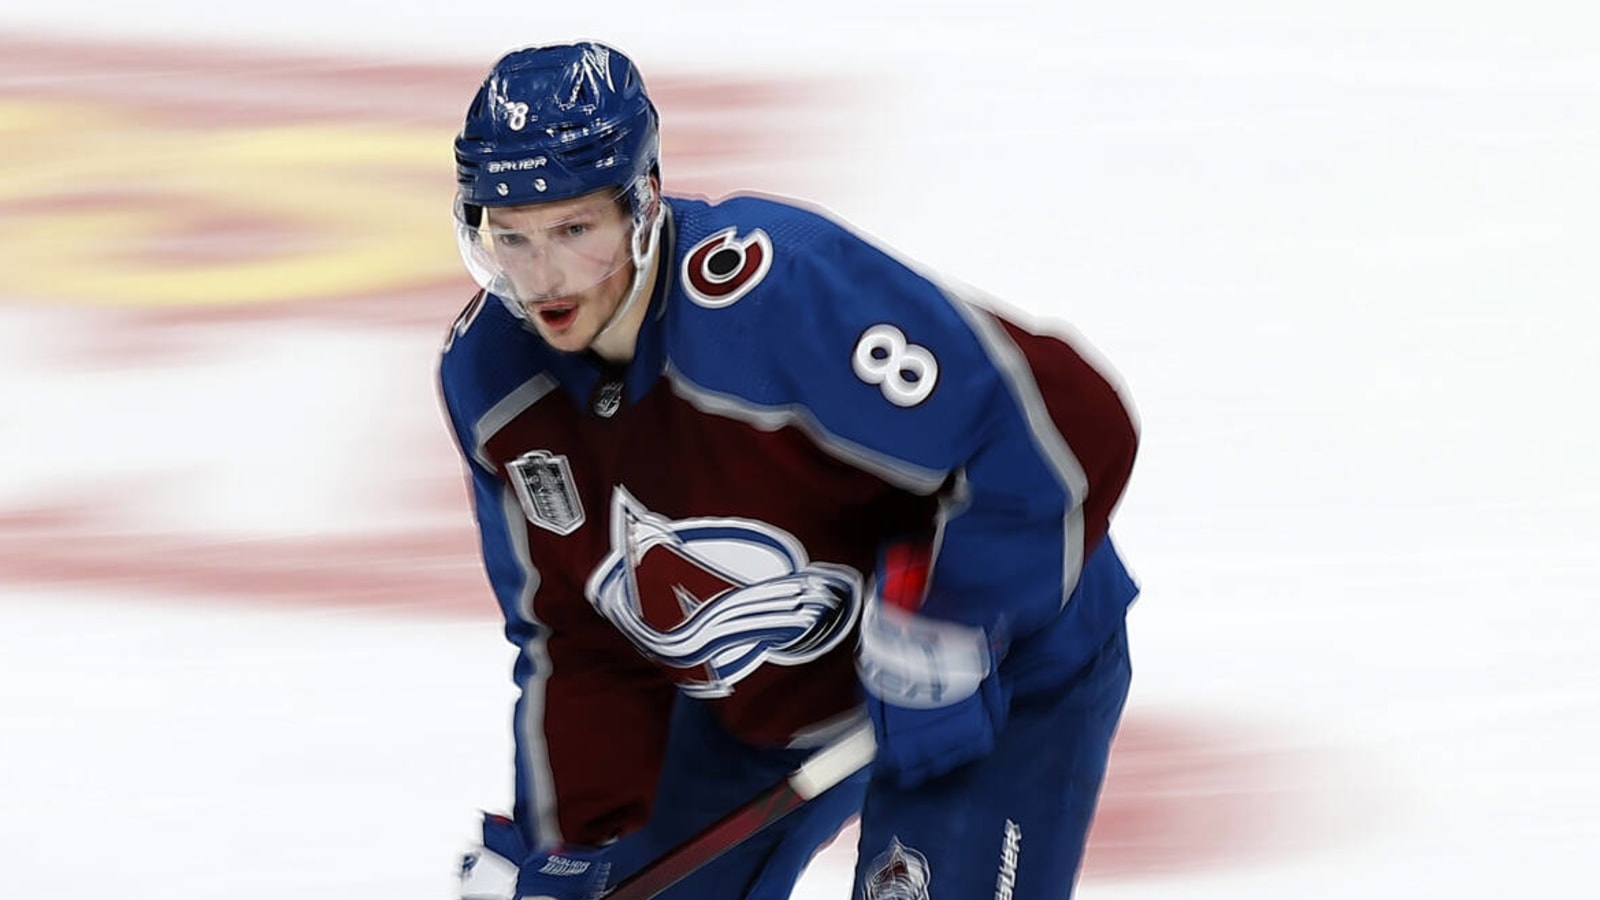 Avalanche star Cale Makar wins the 2022 Norris Trophy